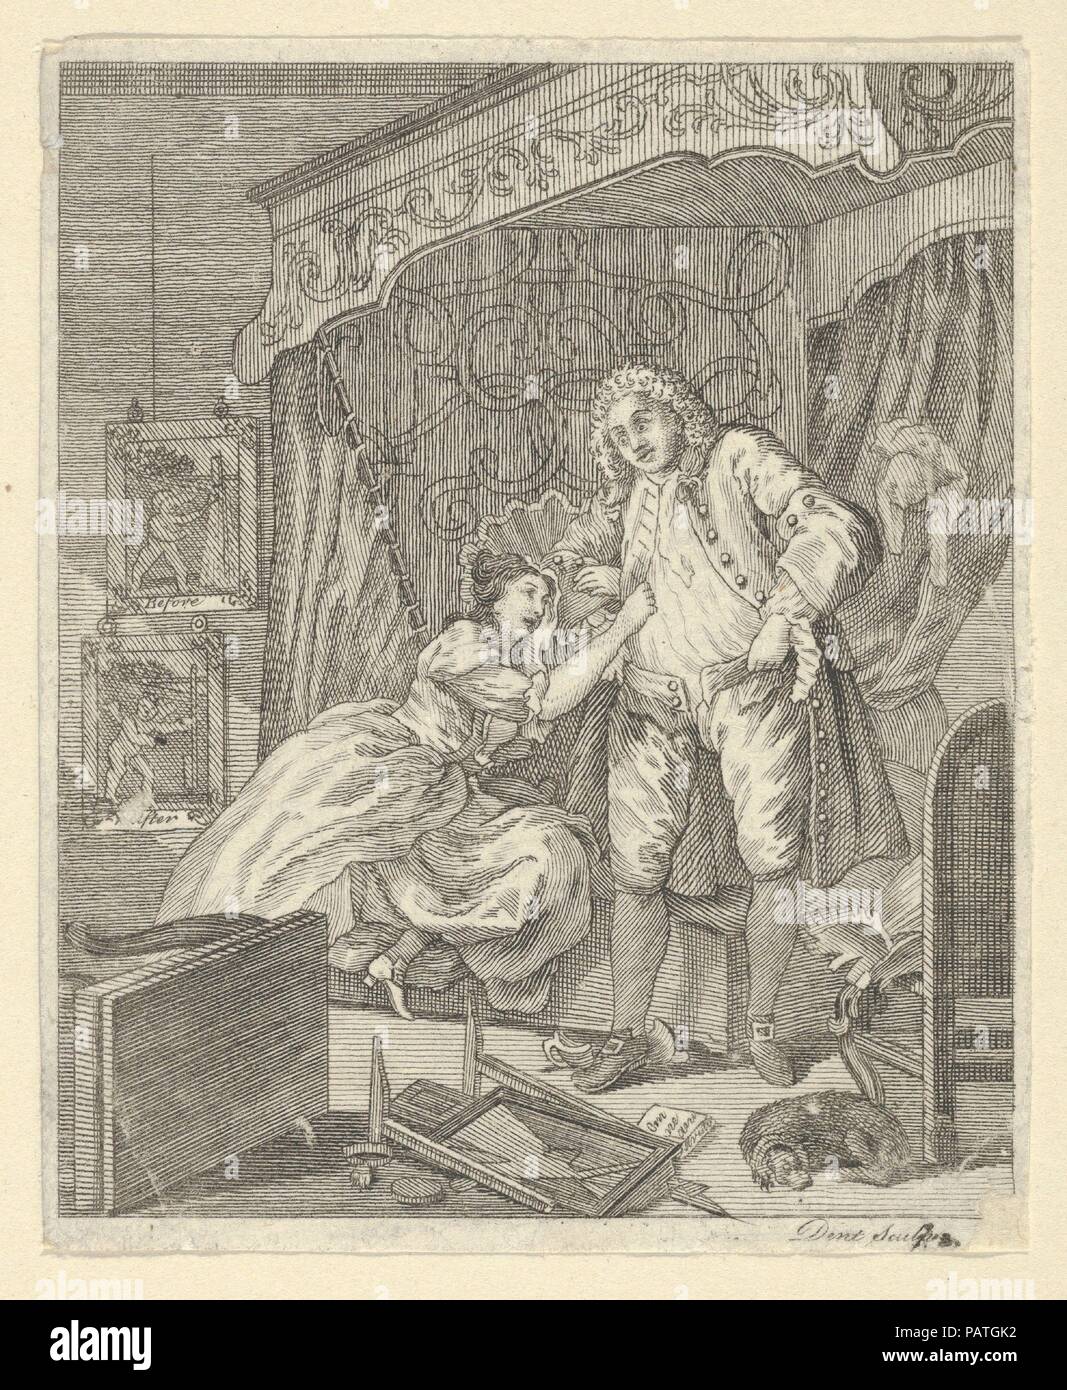 After. Artist: After William Hogarth (British, London 1697-1764 London). Dimensions: Sheet: 2 15/16 x 2 1/2 in. (7.5 x 6.3 cm). Engraver: Engraved by Dent (British, active ca. 1800). Date: 1790-1810. Museum: Metropolitan Museum of Art, New York, USA. Stock Photo